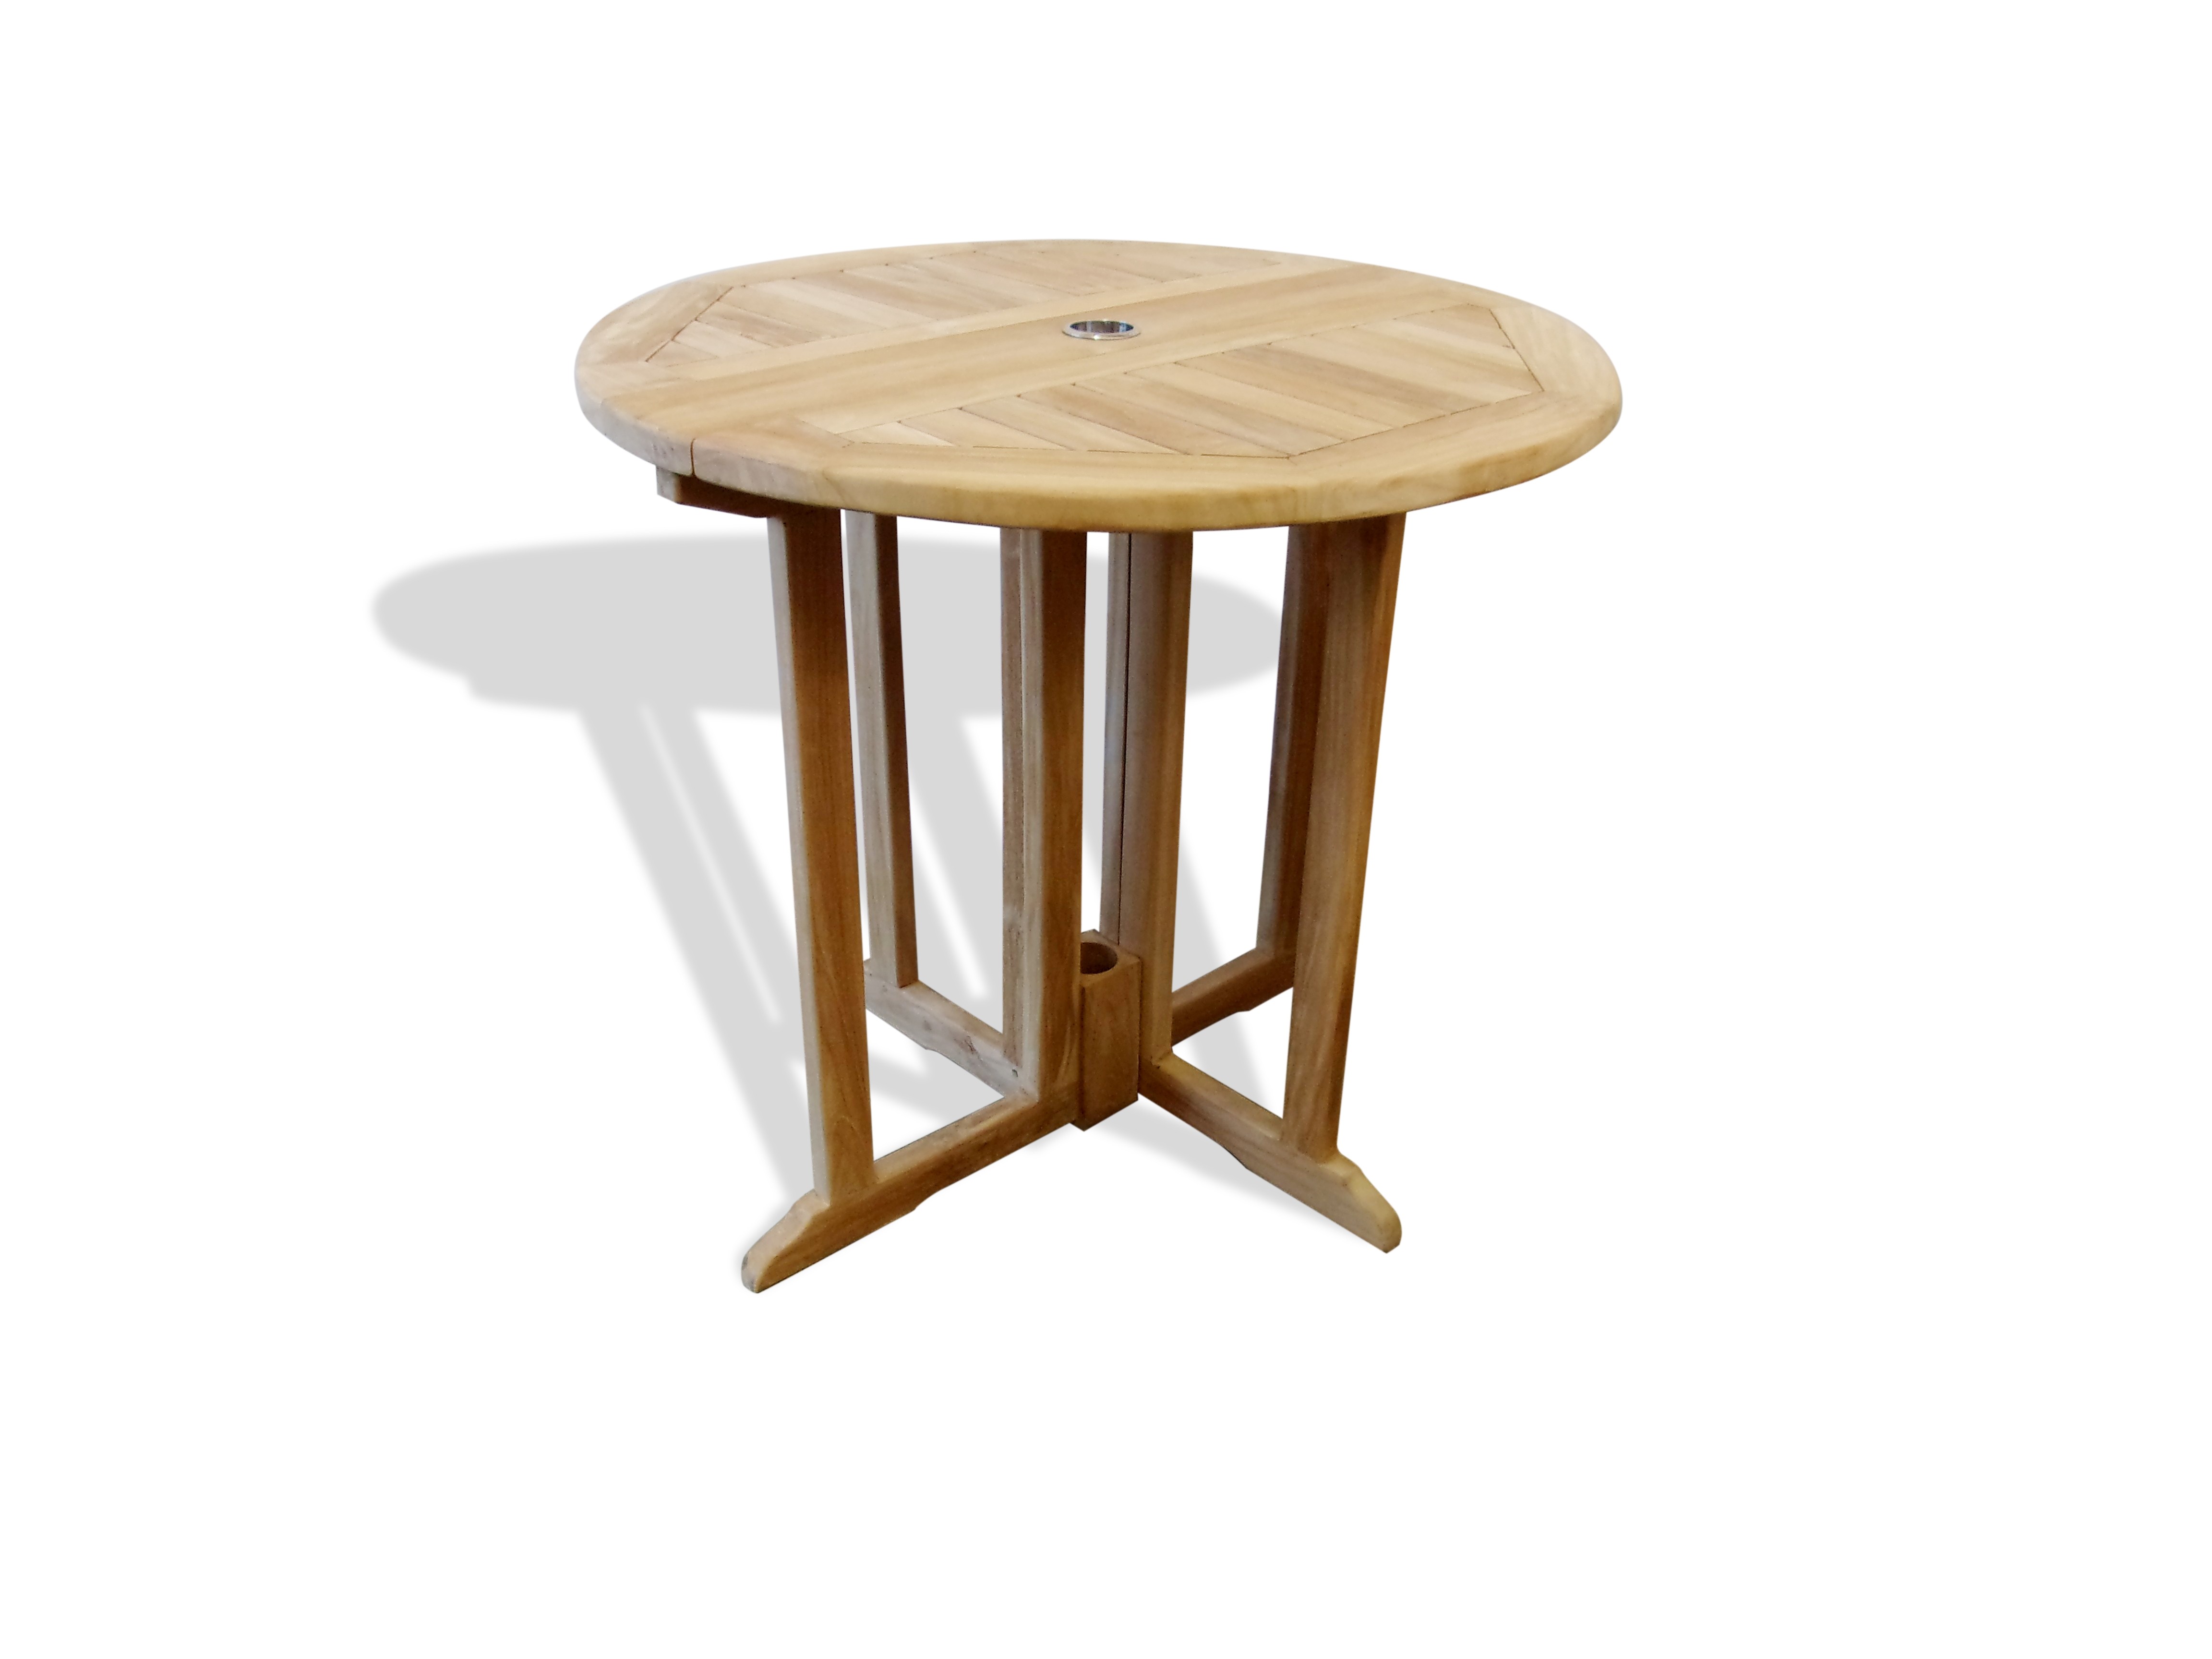 Barcelone 32" Round Drop Leaf Folding Table ...use with 1 Leaf Up or 2.... Makes 2 different tables